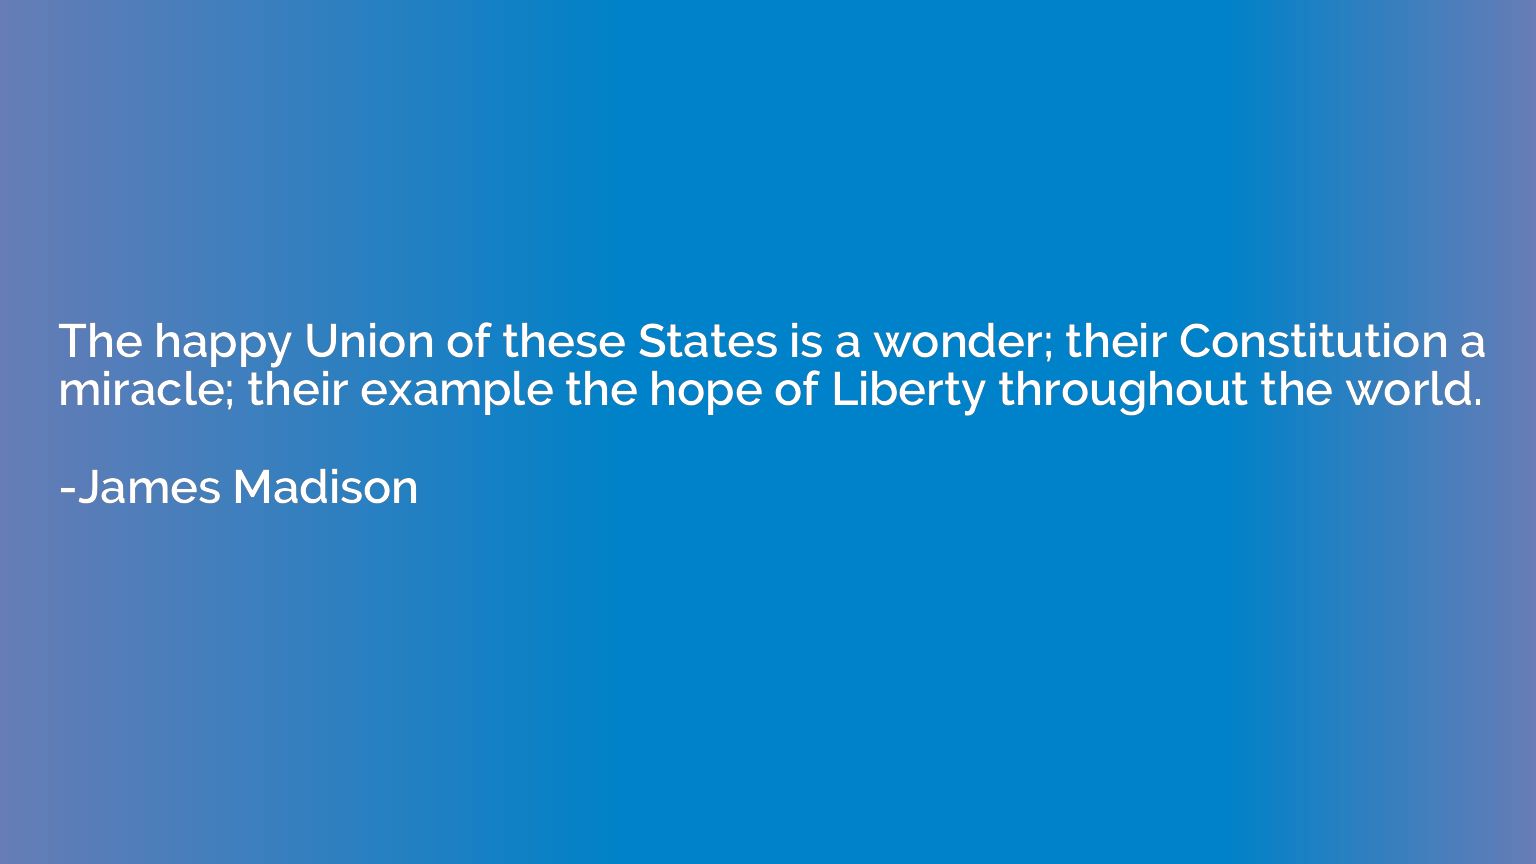 The happy Union of these States is a wonder; their Constitut